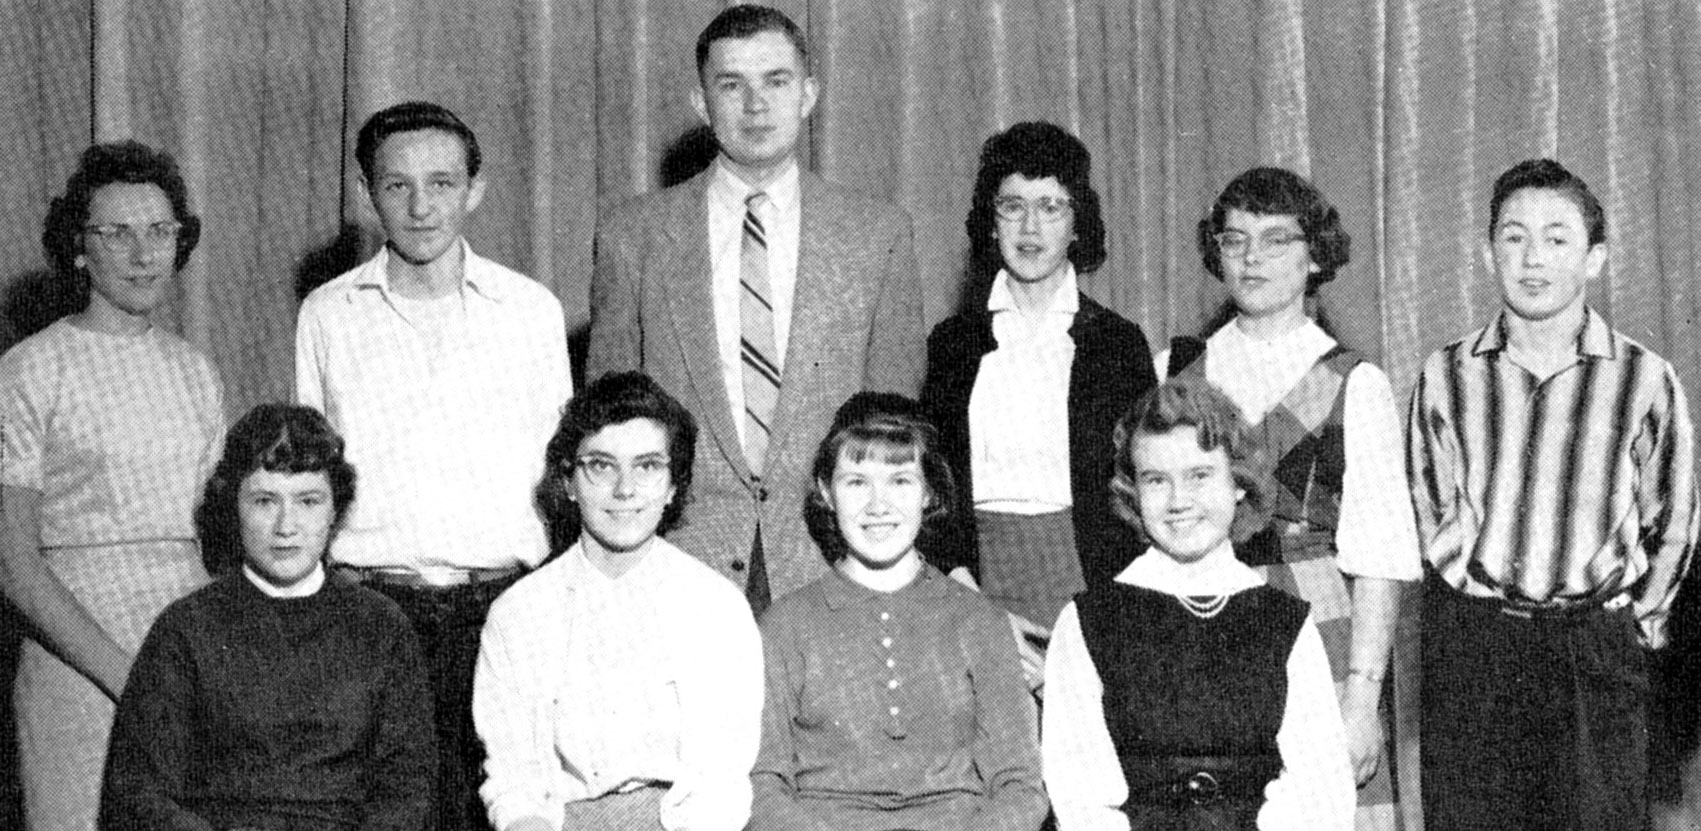 (Click to magnify) FRONT ROW: P. Hall, L. Maye, D. Drummond, L. Hogan; ***BACK ROW: E. Noble, B. Babick, Mr. Prentice, M. Kennedy, G. Orr, Jim Wagg; ***ABSENT V. Geissberger.